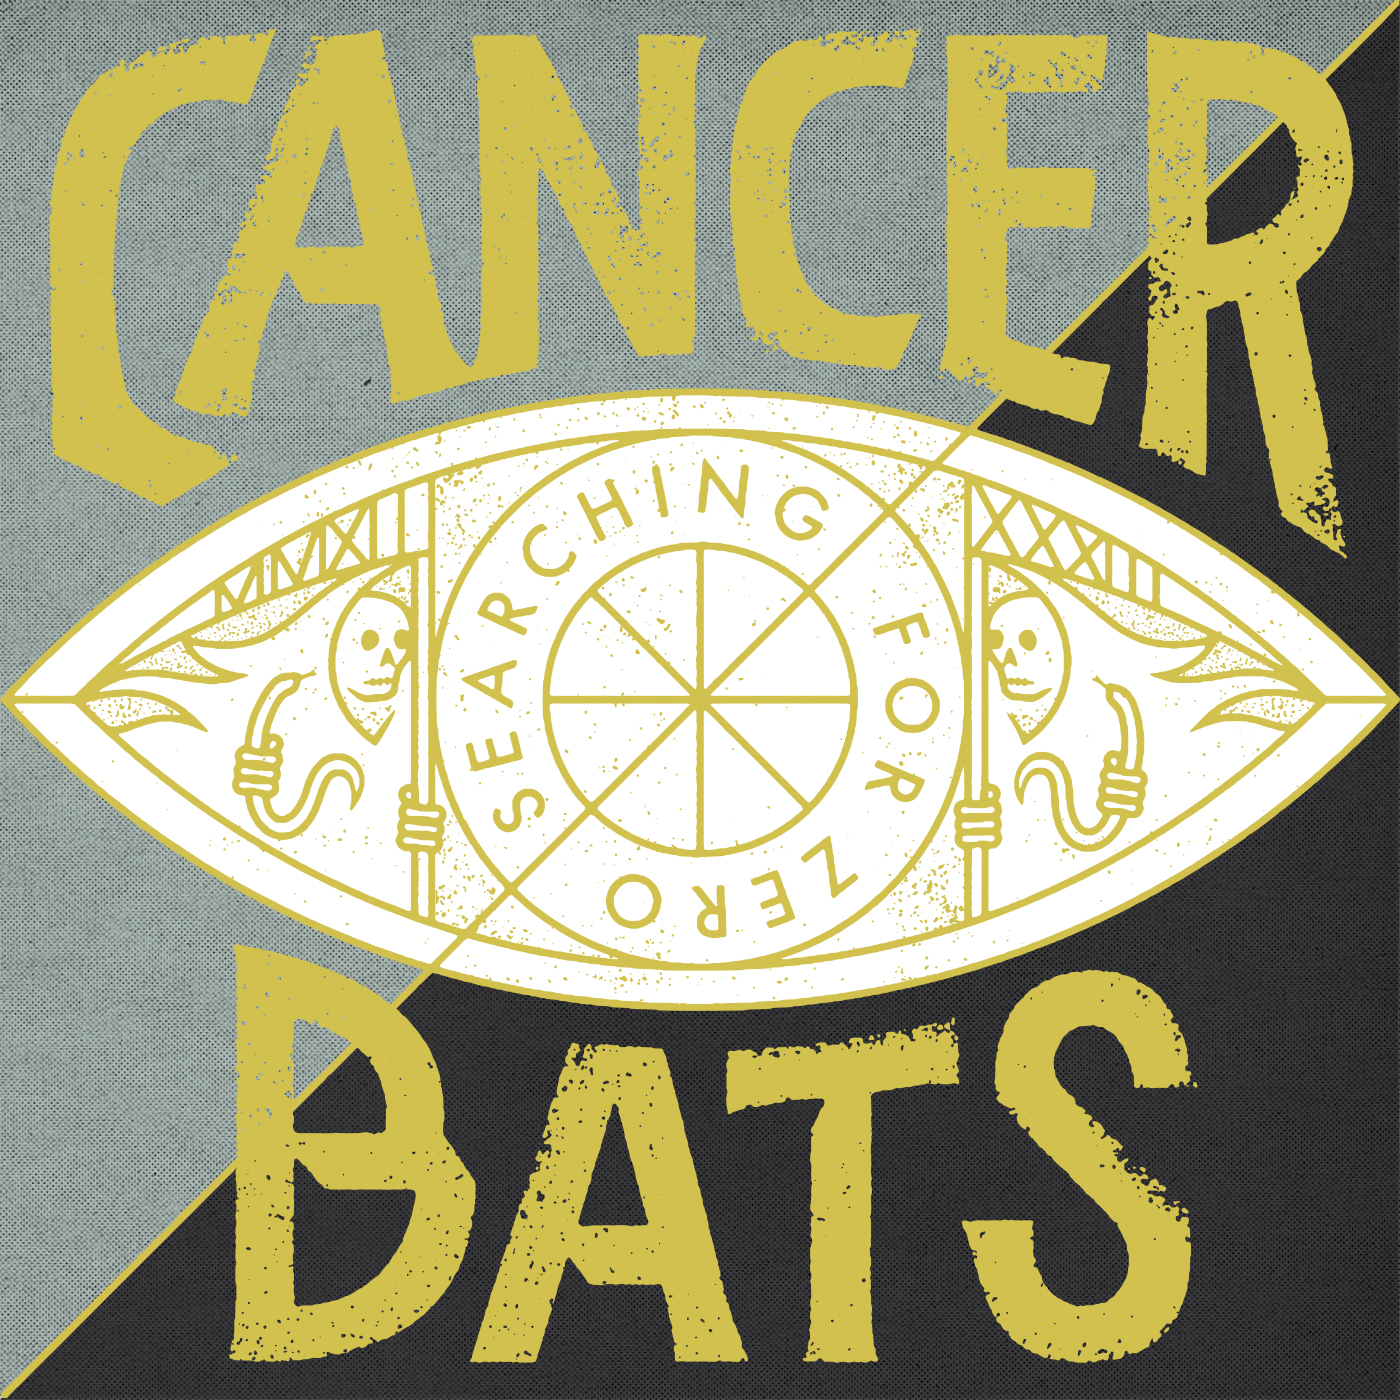 Cancer Bats - Searching For Zero (2015) FLAC Download